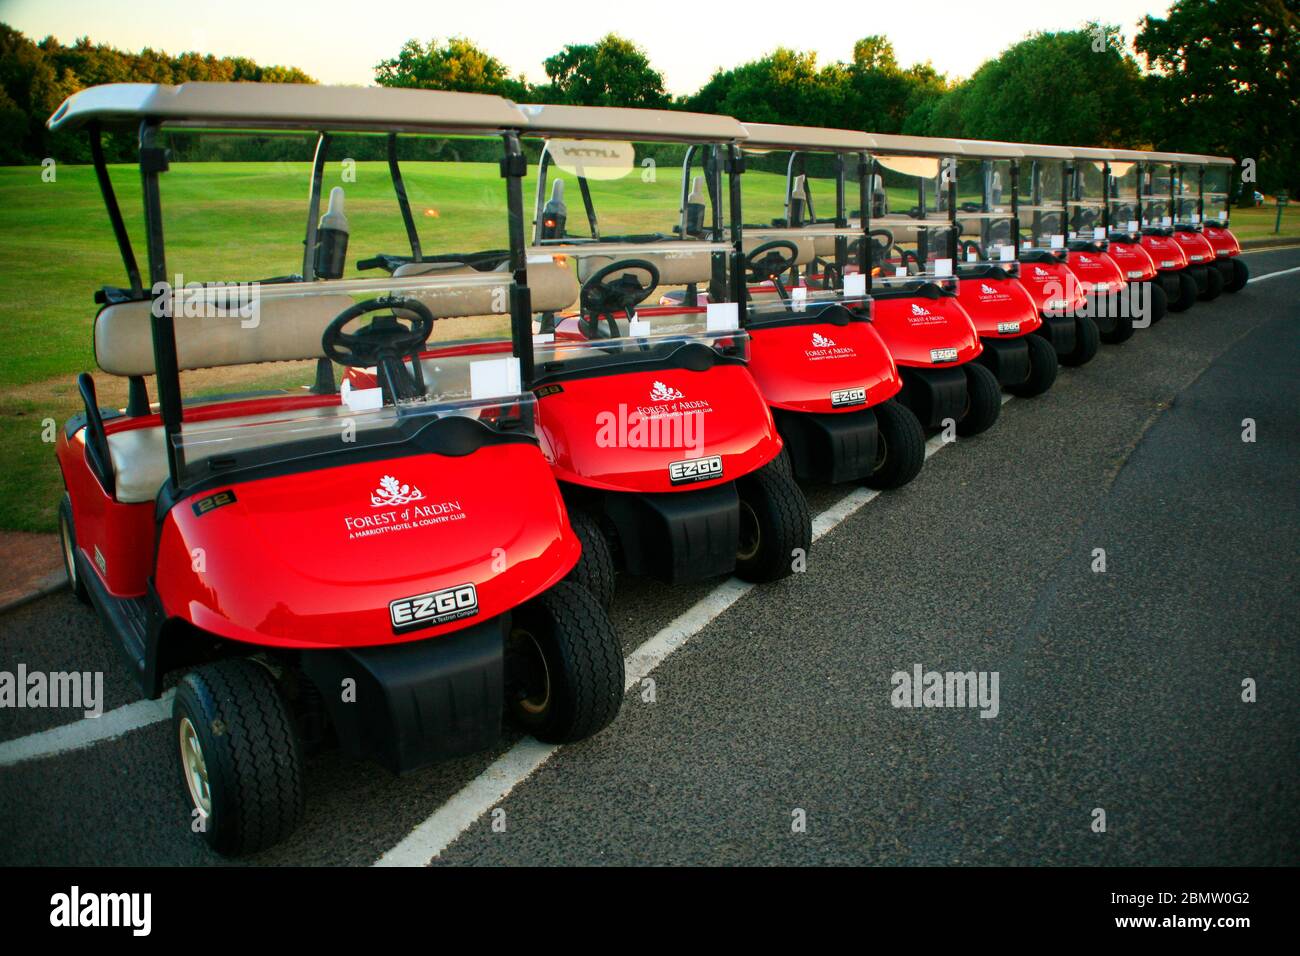 Golf Buggies (carts) in a line ready to go. Stock Photo